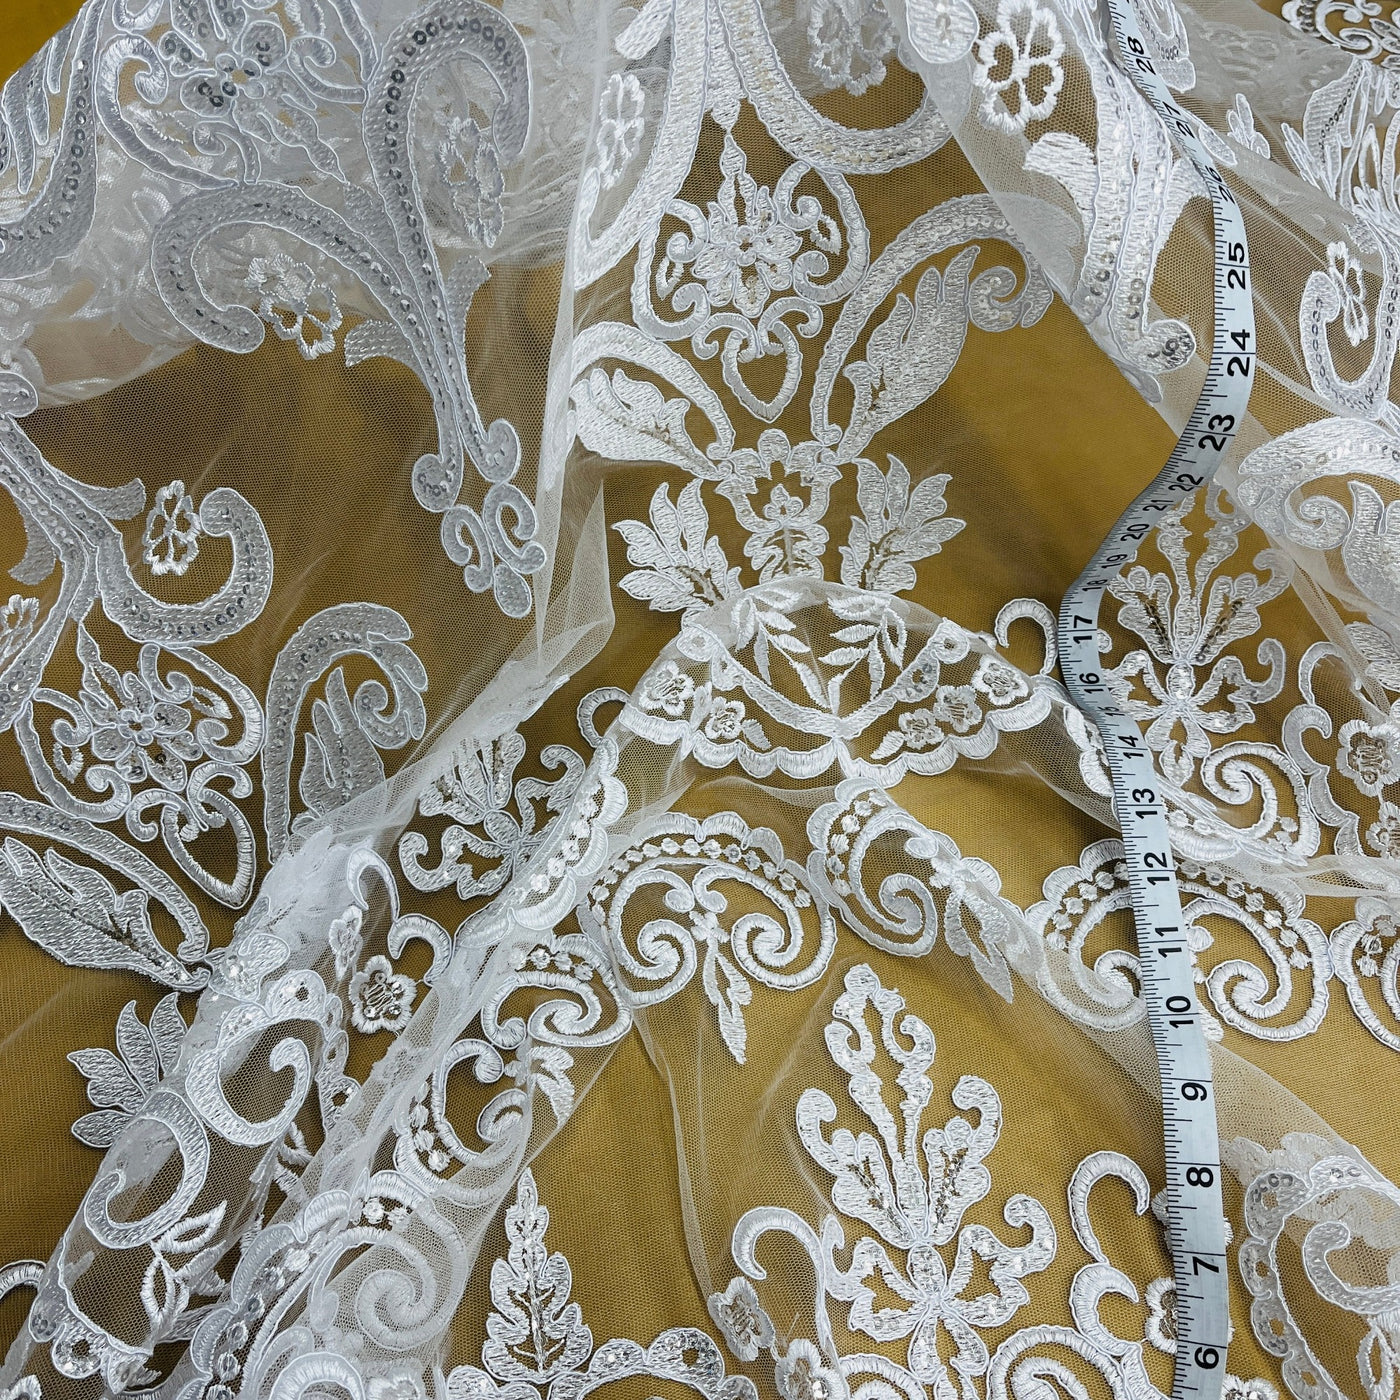 Beaded & Corded Bridal Lace Fabric Embroidered on 100% Polyester Net Mesh | Lace USA - 97068W-SB White